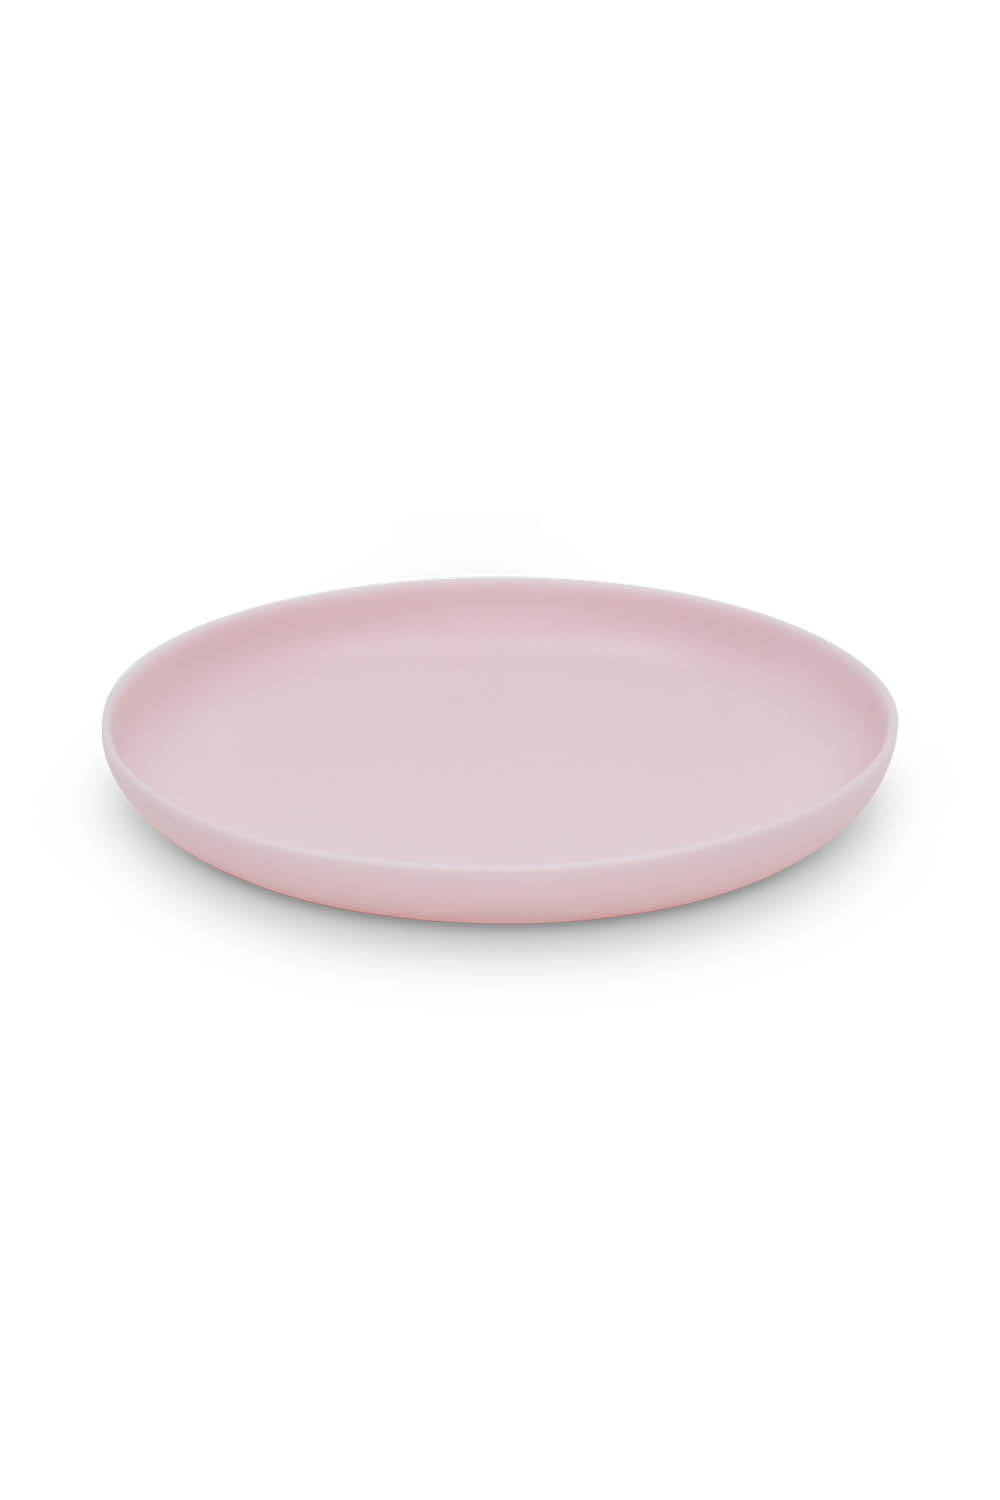 MODERN Large Plate in Pale Rose